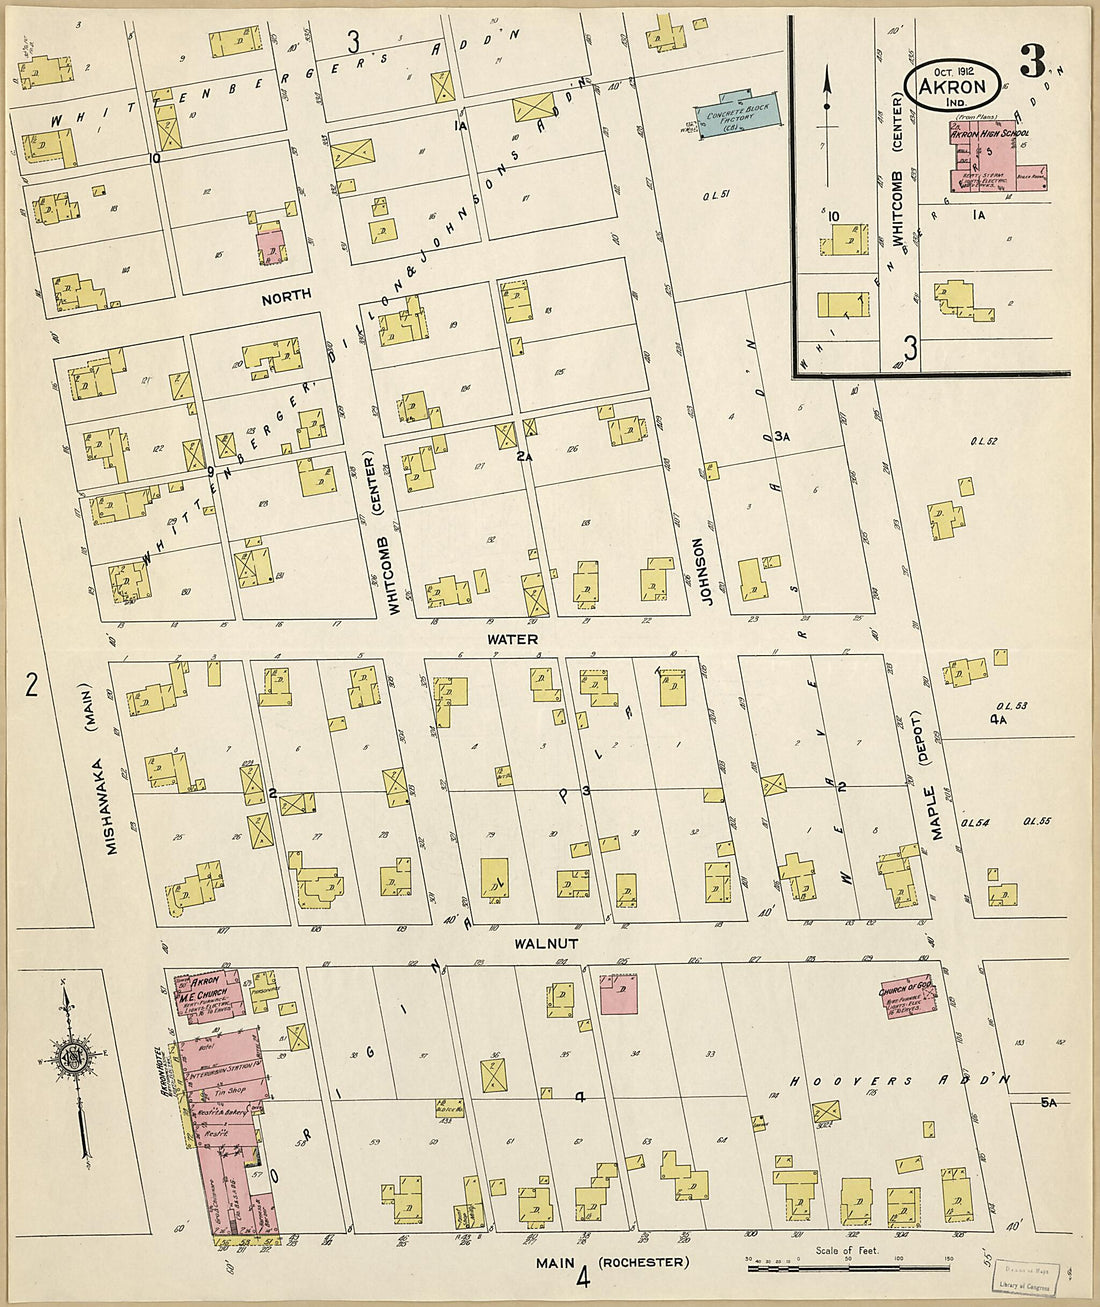 This old map of Akron, Fulton County, Indiana was created by Sanborn Map Company in 1912